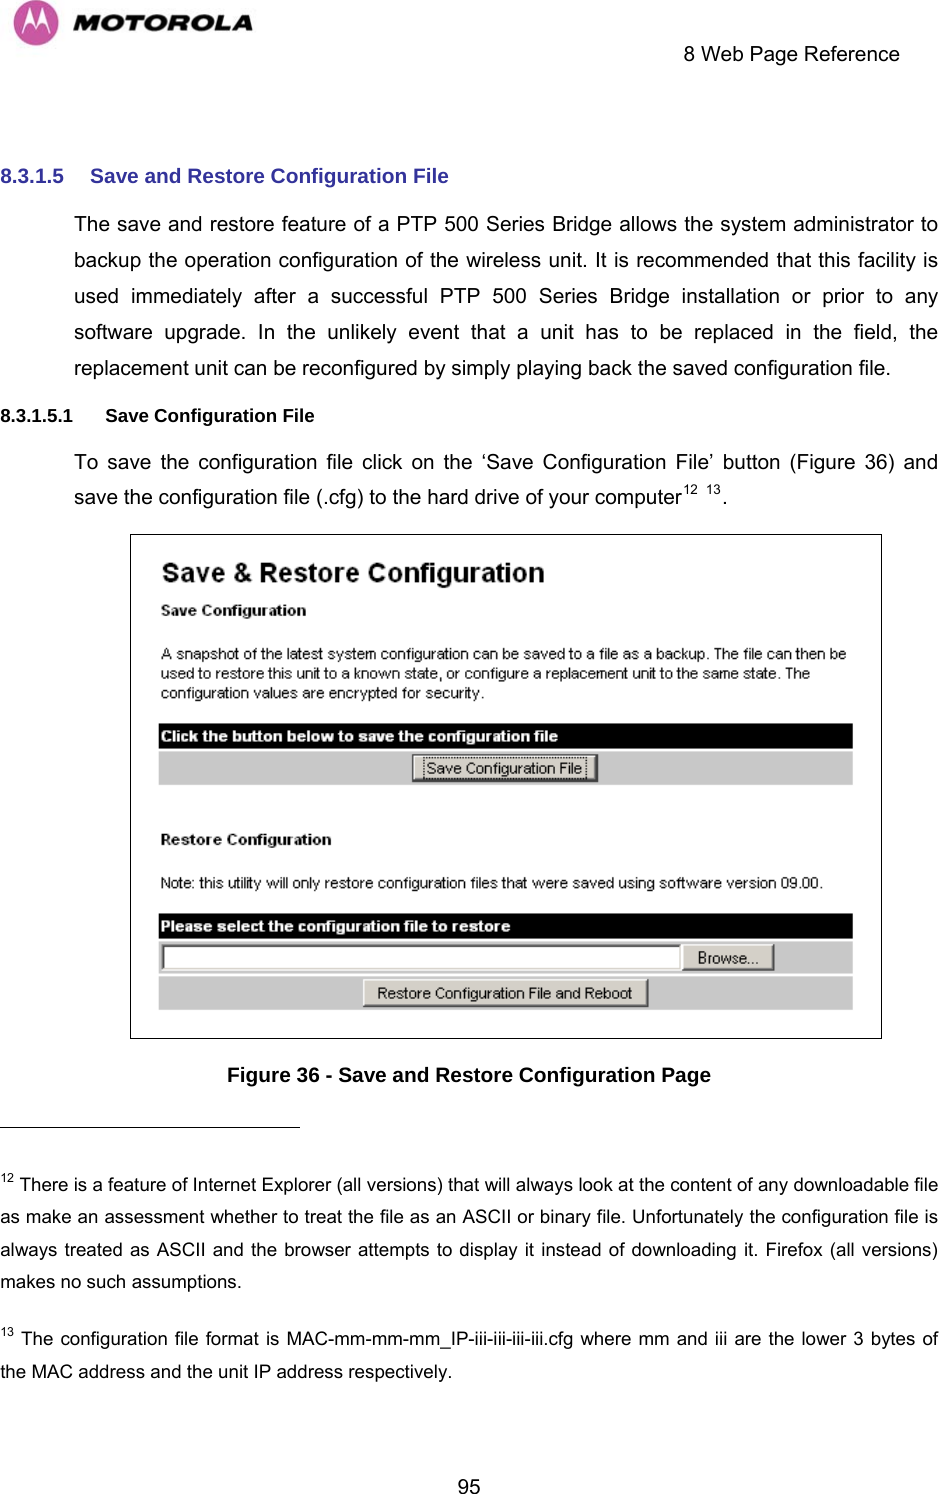     8 Web Page Reference  95 8.3.1.5  Save and Restore Configuration File The save and restore feature of a PTP 500 Series Bridge allows the system administrator to backup the operation configuration of the wireless unit. It is recommended that this facility is used immediately after a successful PTP 500 Series Bridge installation or prior to any software upgrade. In the unlikely event that a unit has to be replaced in the field, the replacement unit can be reconfigured by simply playing back the saved configuration file. 8.3.1.5.1  Save Configuration File To save the configuration file click on the ‘Save Configuration File’ button (Figure 36) and save the configuration file (.cfg) to the hard drive of your computer12 13.   Figure 36 - Save and Restore Configuration Page                                                       12 There is a feature of Internet Explorer (all versions) that will always look at the content of any downloadable file as make an assessment whether to treat the file as an ASCII or binary file. Unfortunately the configuration file is always treated as ASCII and the browser attempts to display it instead of downloading it. Firefox (all versions) makes no such assumptions. 13 The configuration file format is MAC-mm-mm-mm_IP-iii-iii-iii-iii.cfg where mm and iii are the lower 3 bytes of the MAC address and the unit IP address respectively. 